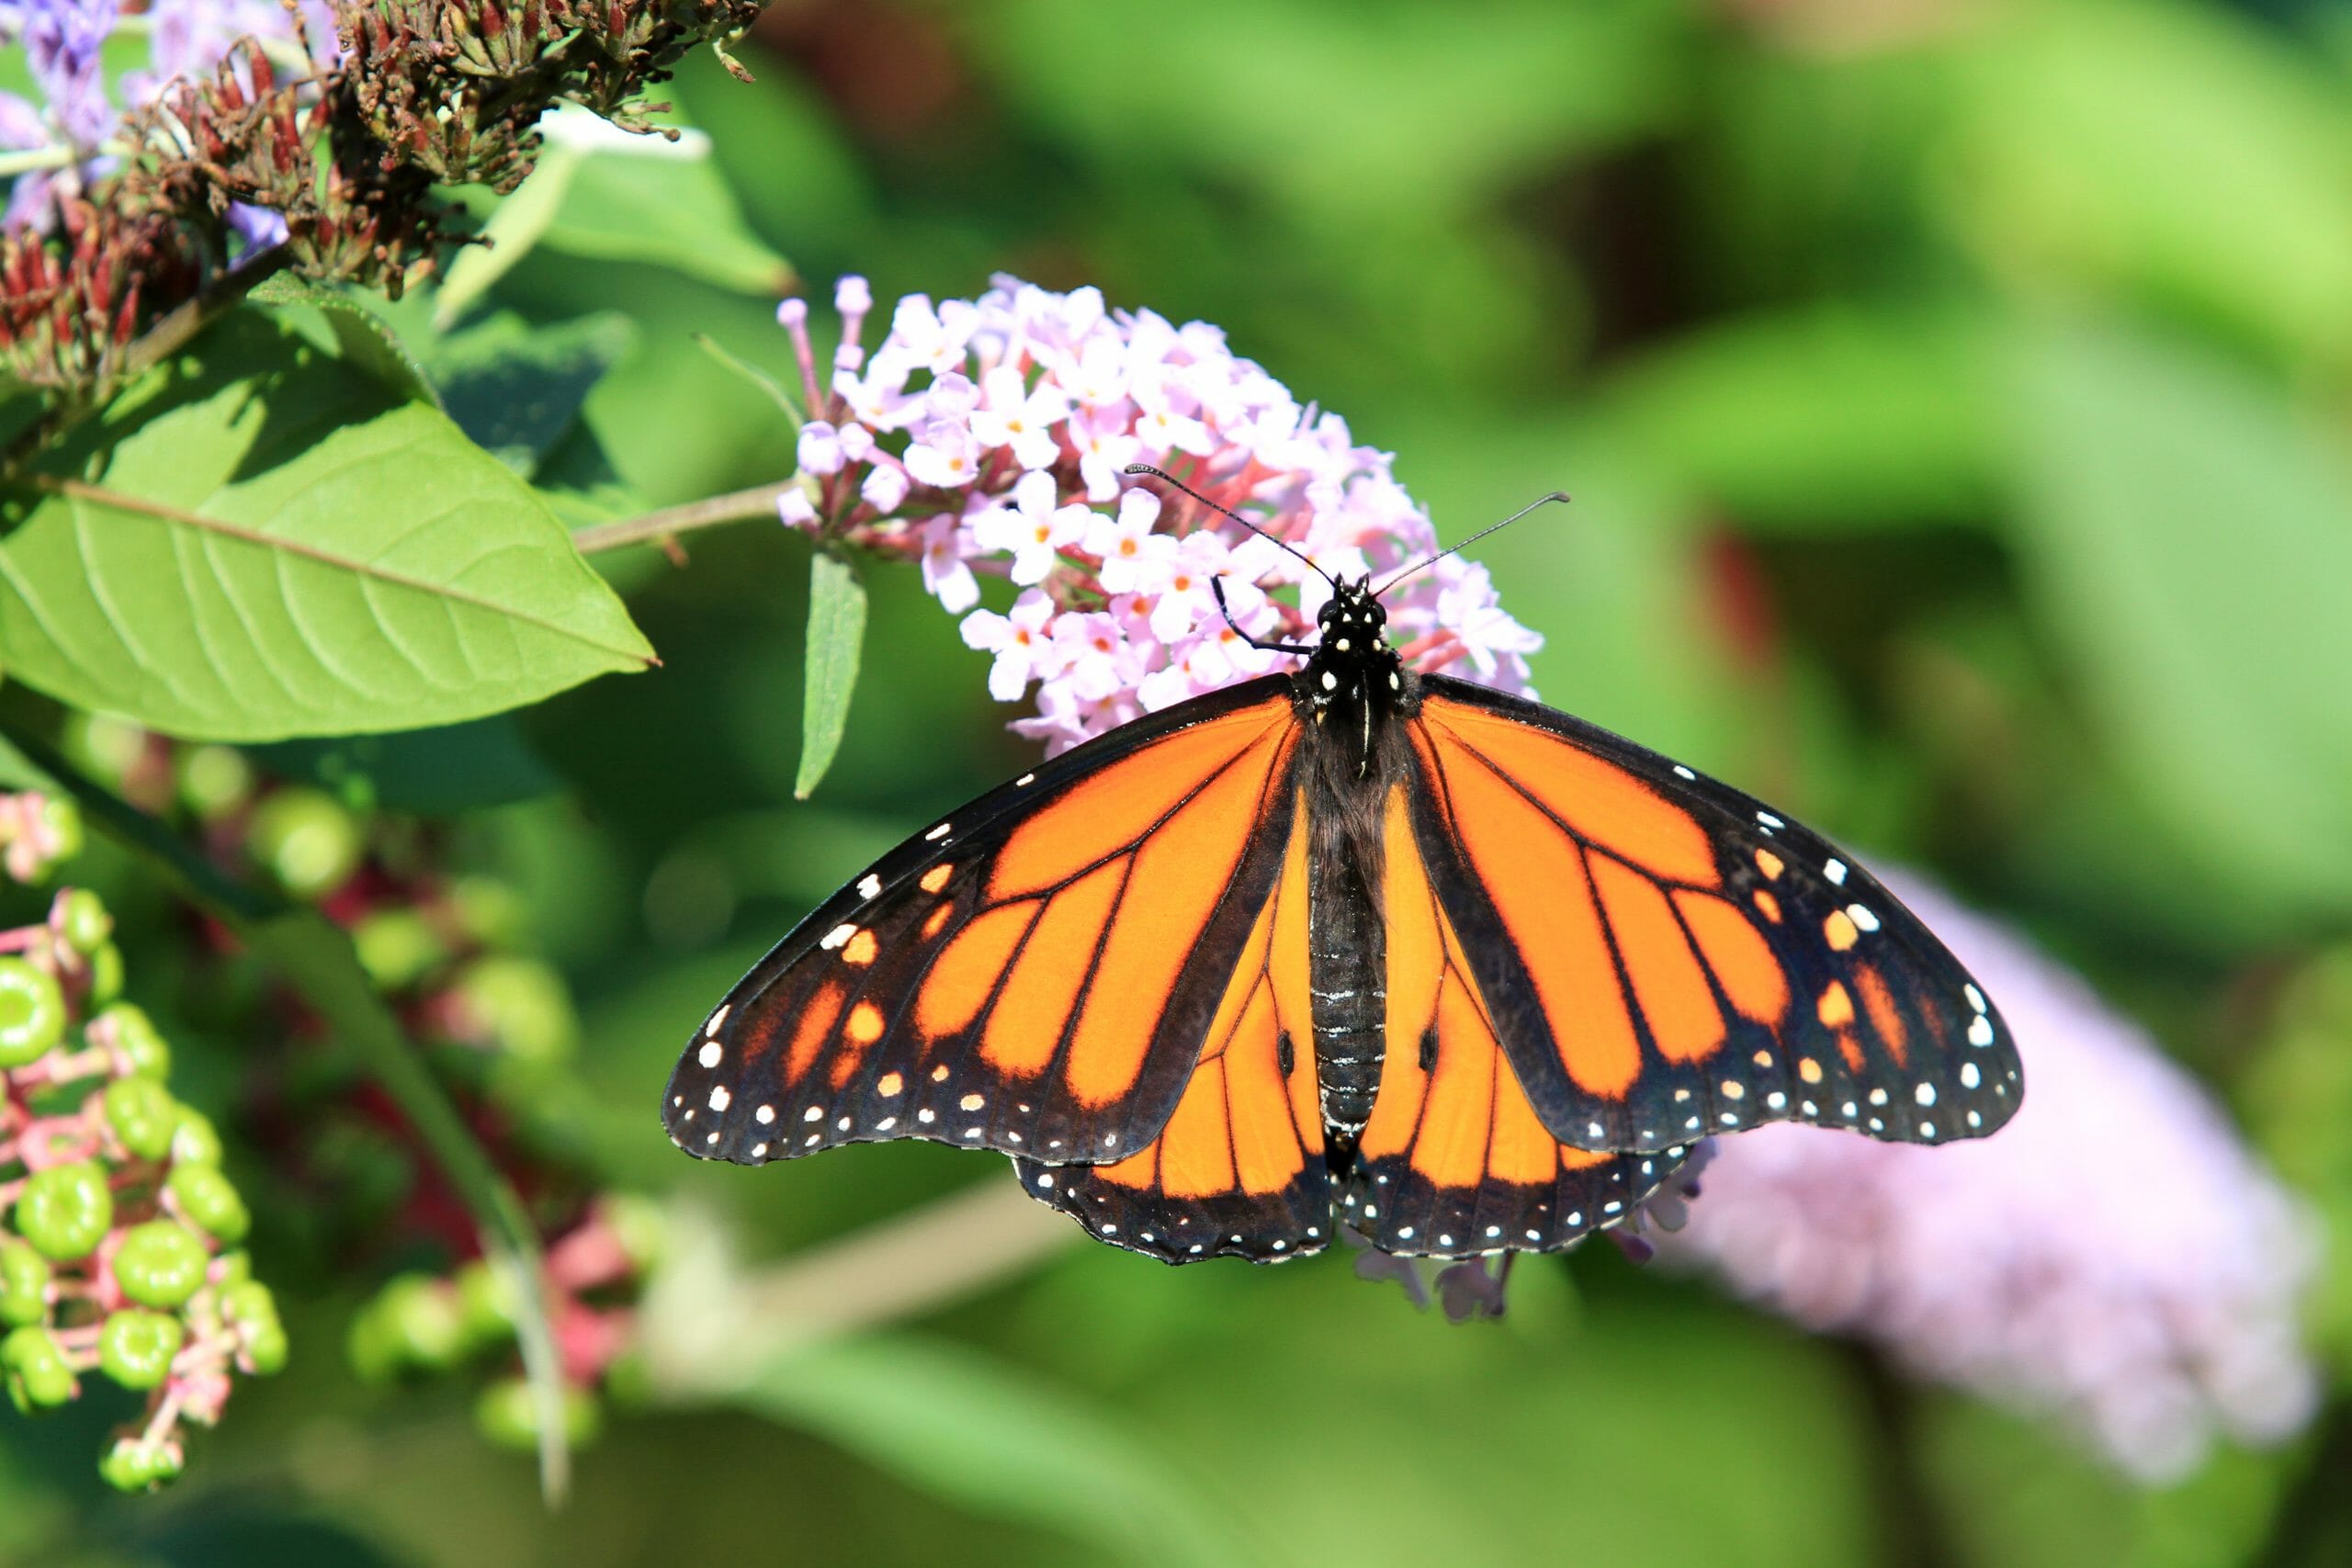 Where to find Monarch Butterflies